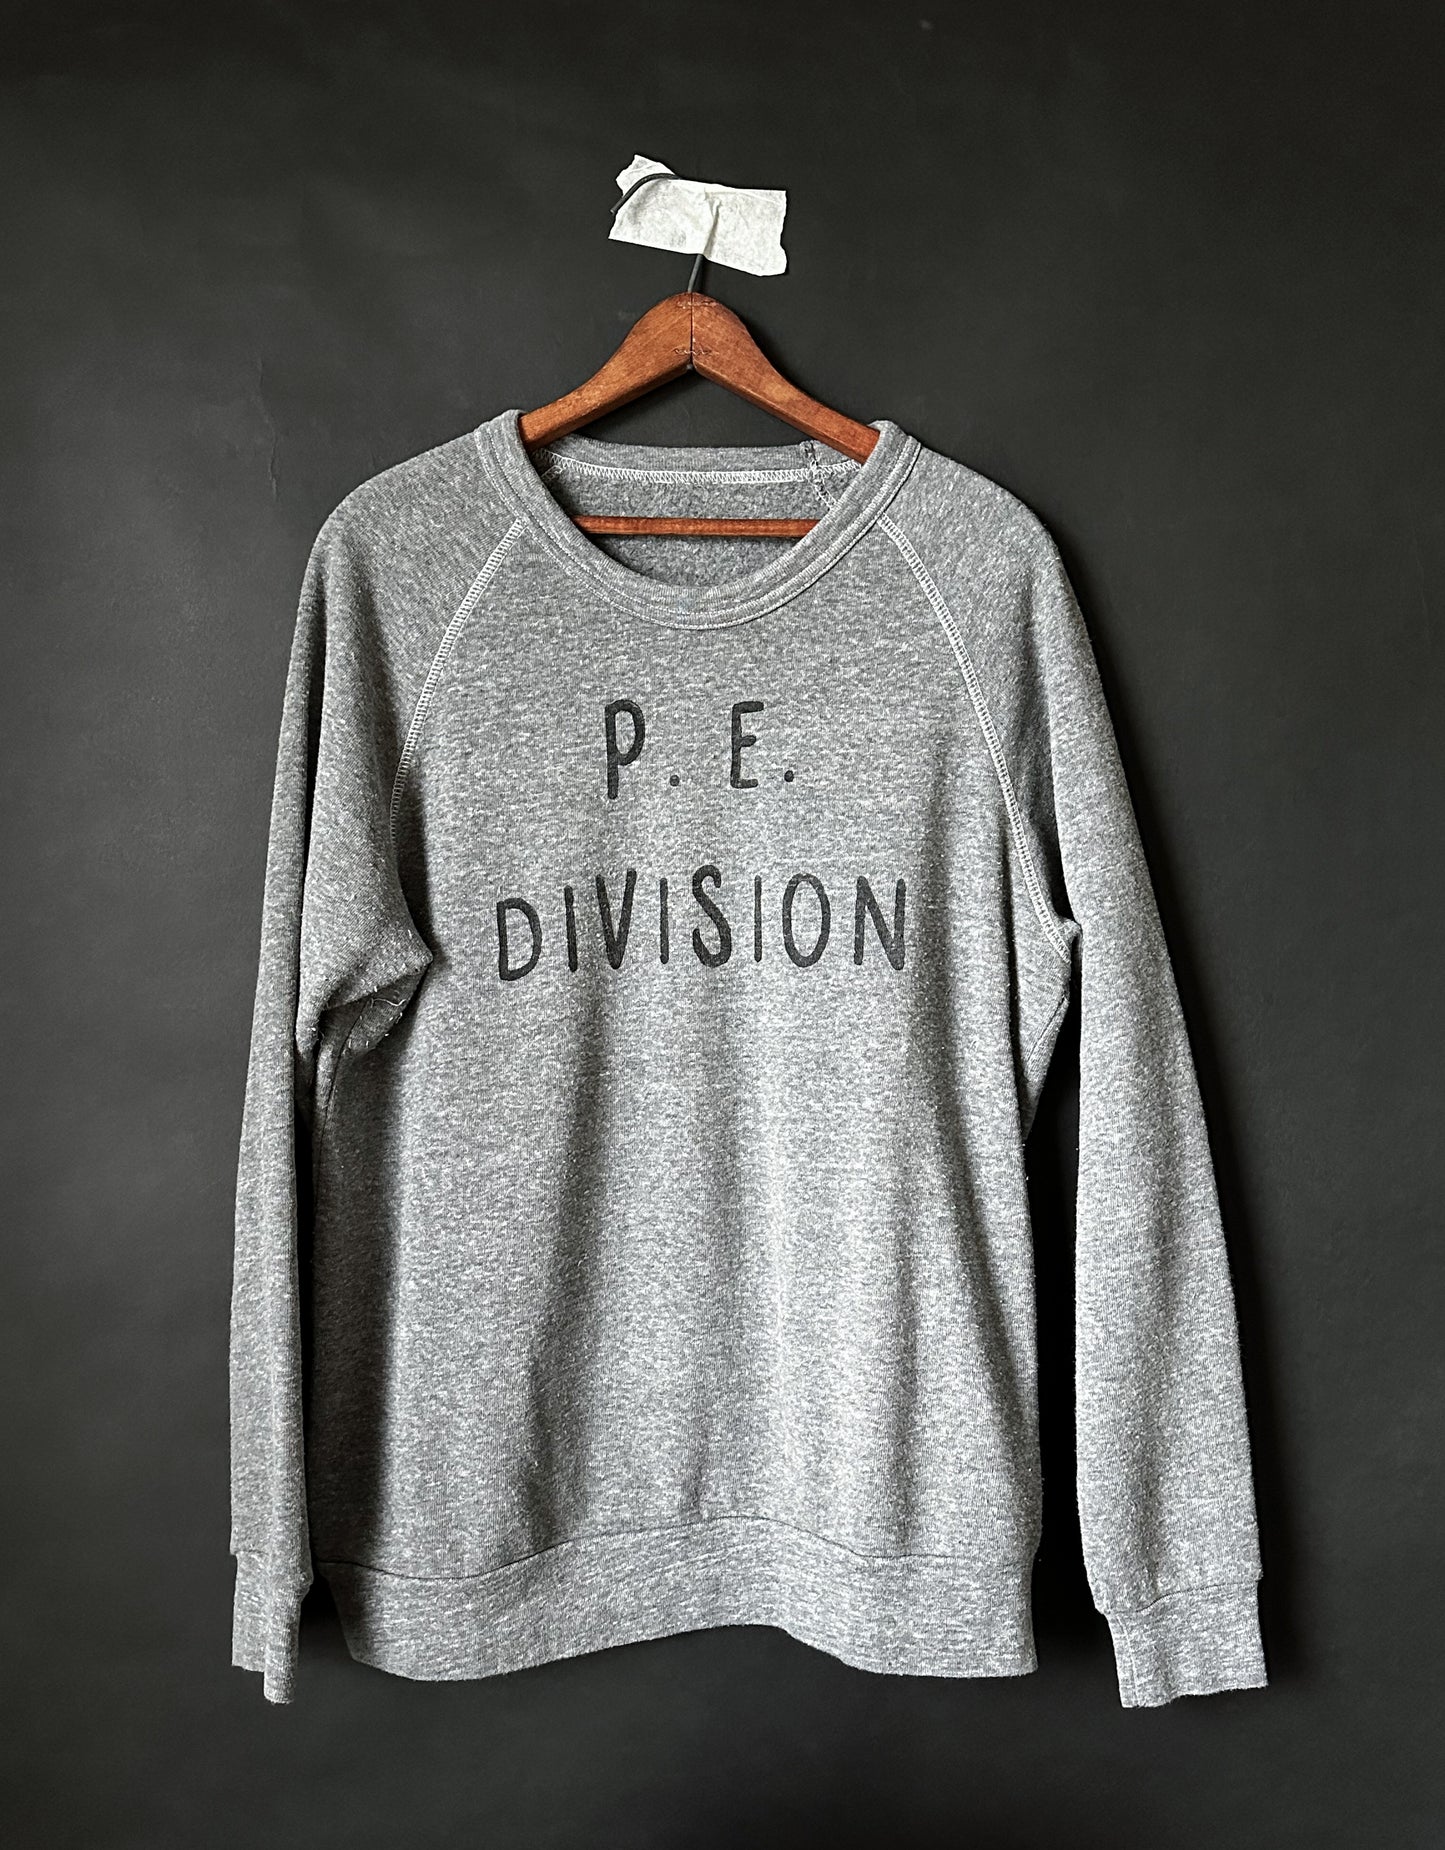 P.E. DIVISION HAND STAMPED SWEATSHIRT | ATHLETIC GREY TRI-BLEND